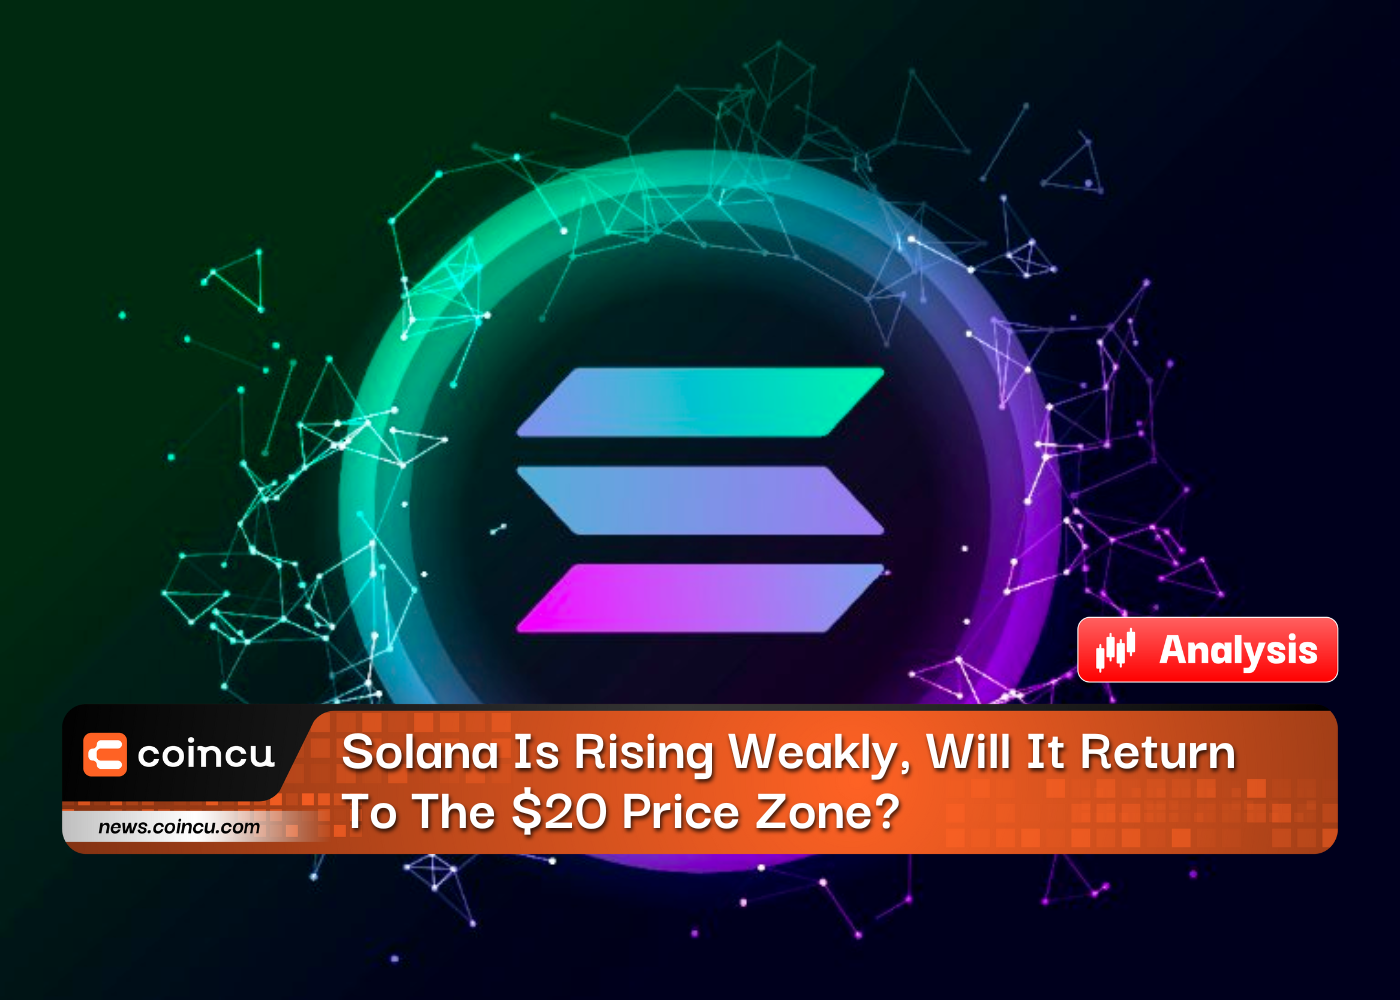 Solana Is Rising Weakly, Will It Return To The $20 Price Zone?